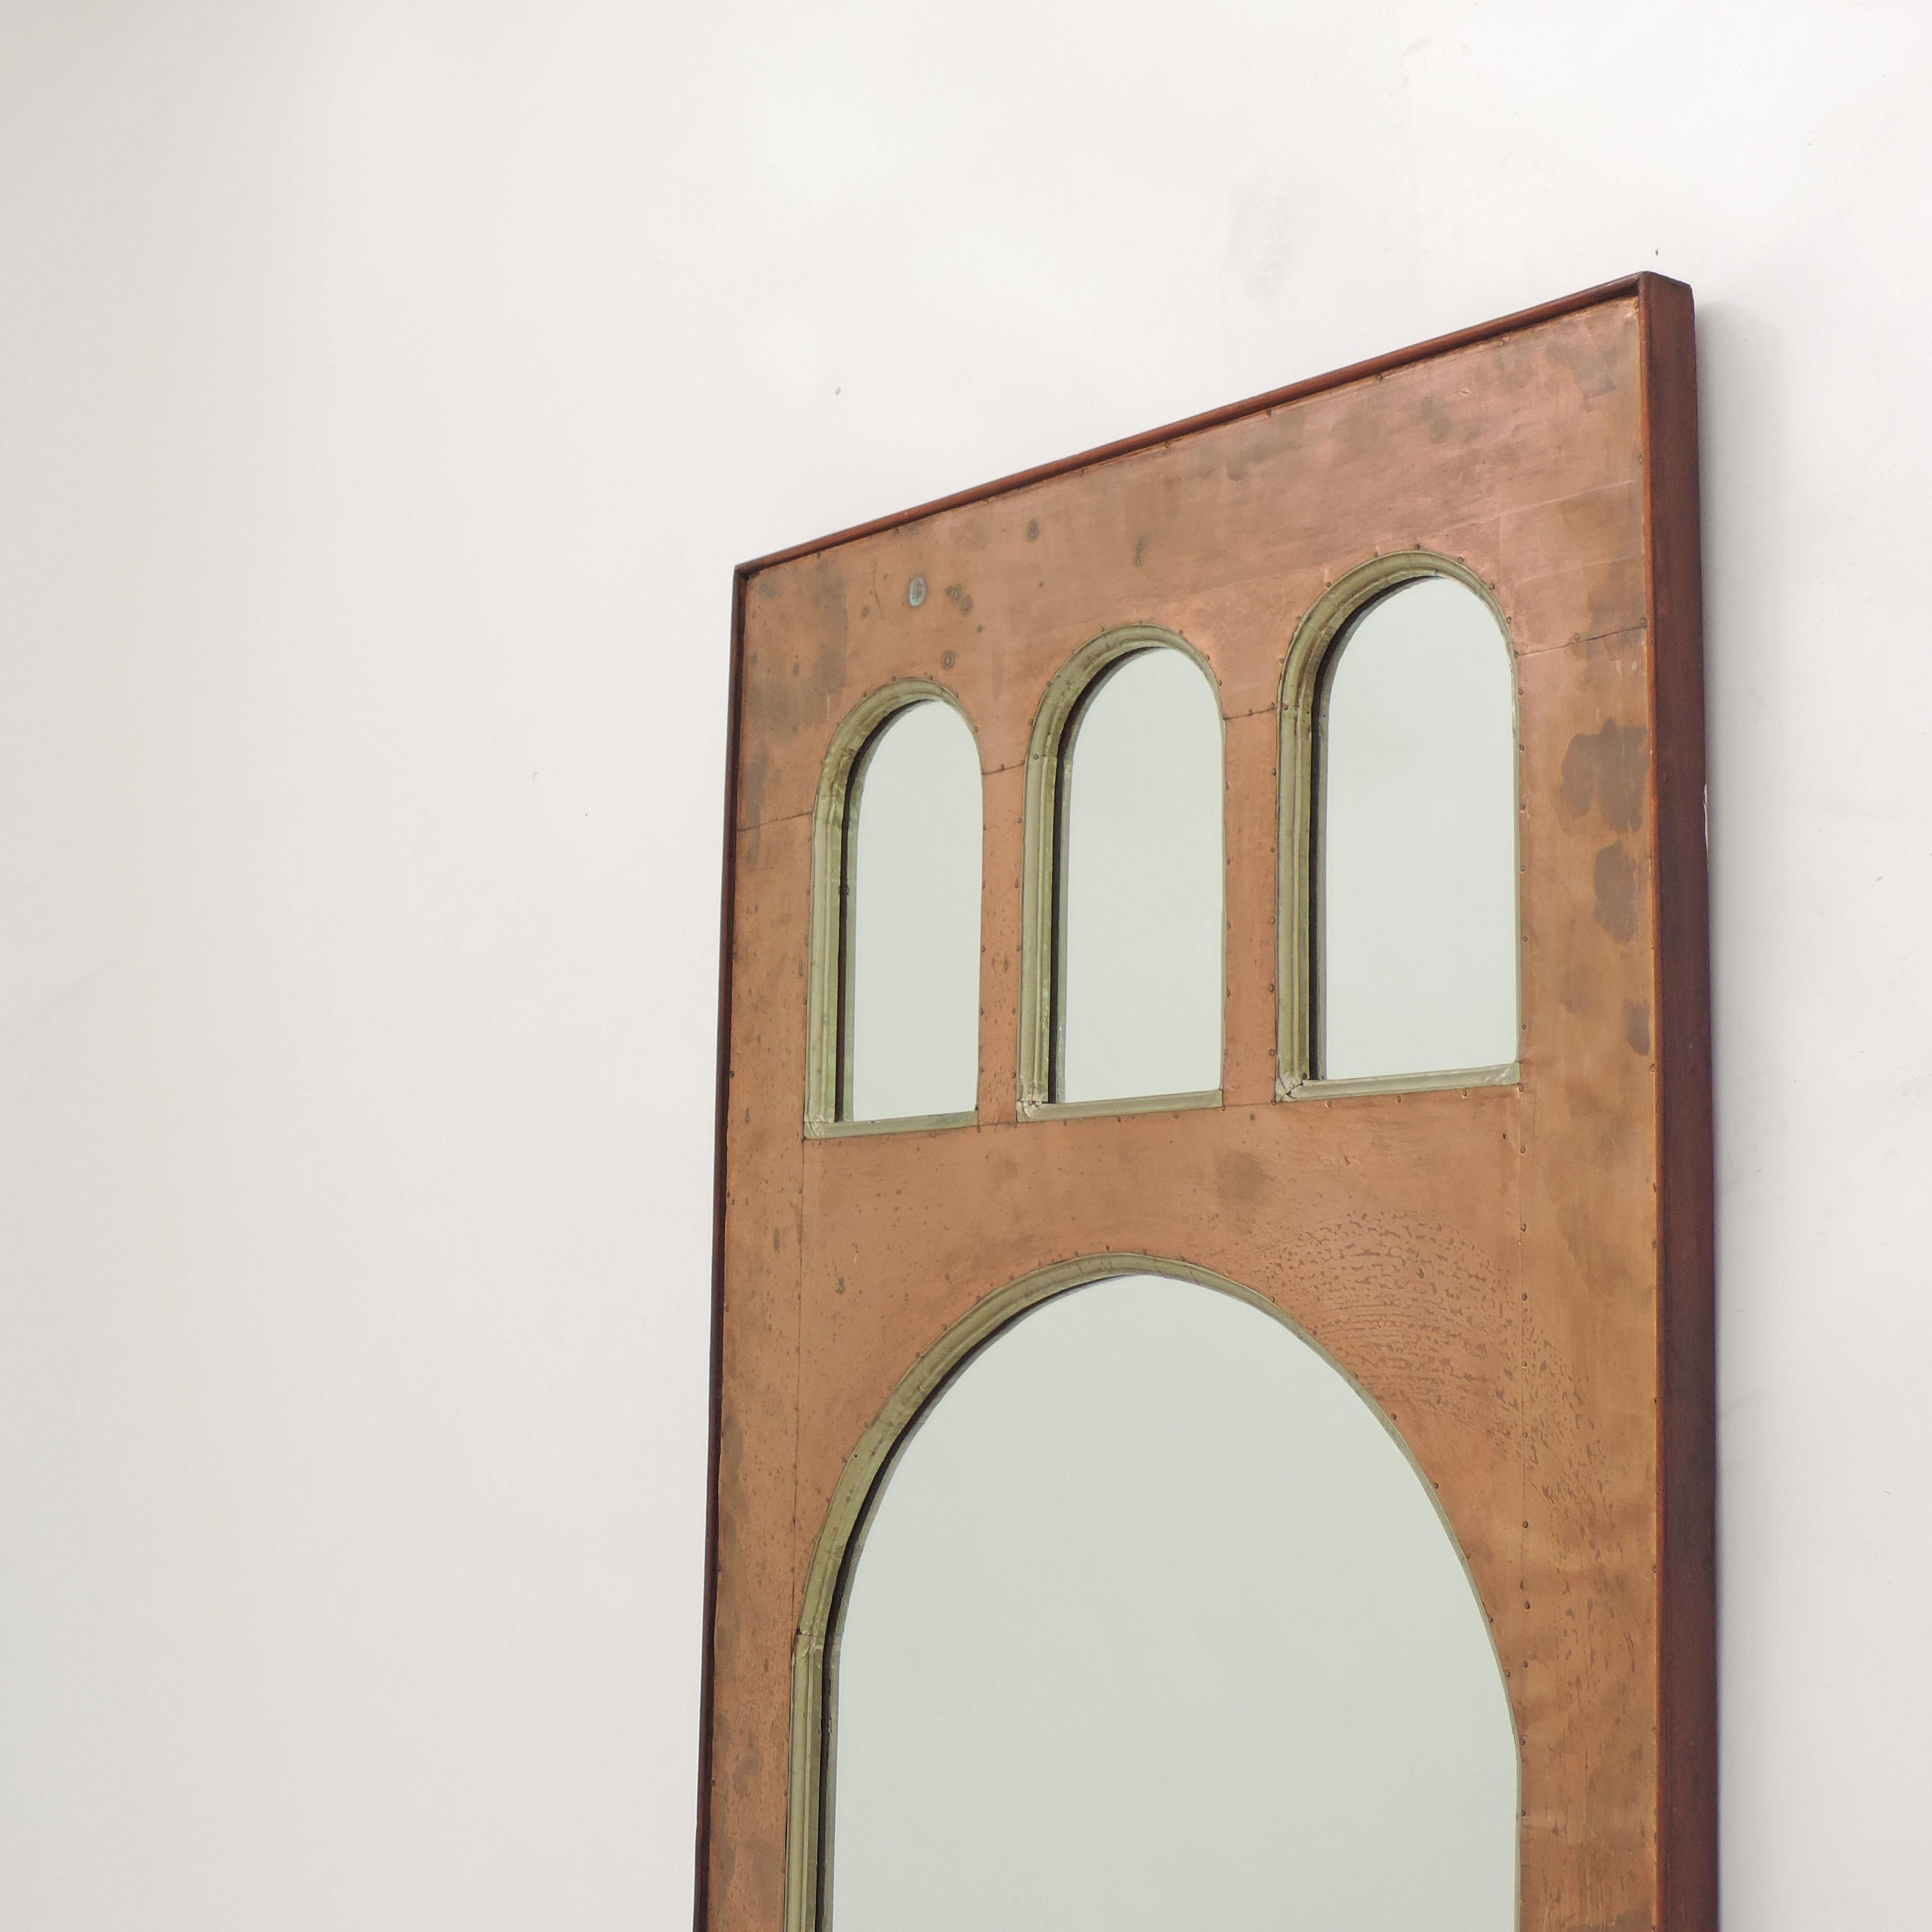 Splendid Pontiesque classical Italian Metaphysical 1950s-1960s copper wall mirror.
Hammered copper and aluminum sheets on wood.
Attributed to Lorenzo Burchiellaro.
  